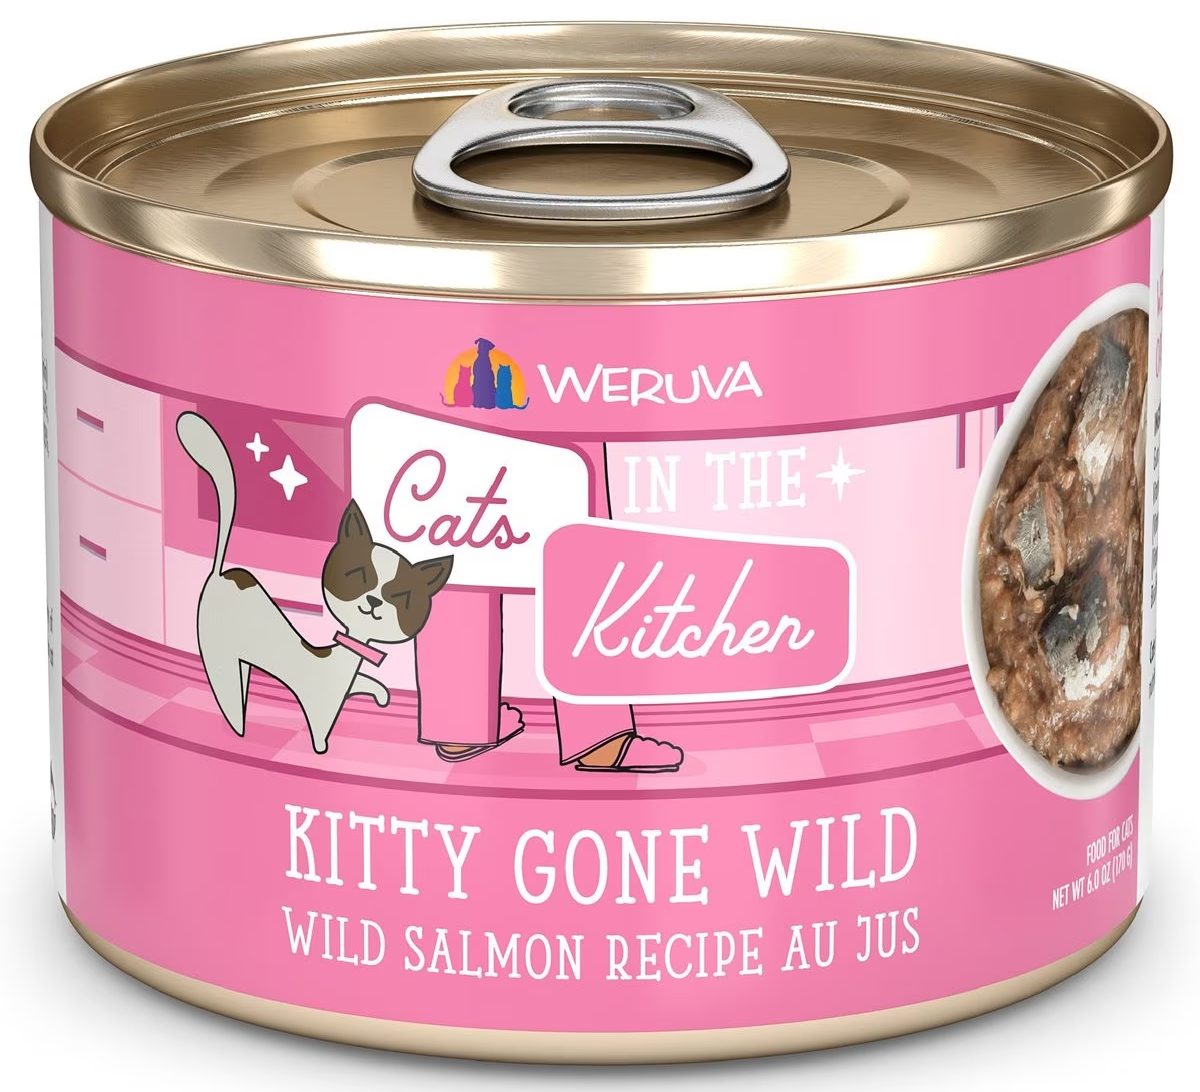 Weruva Cats in the Kitchen Grain-Free Canned Cat Food